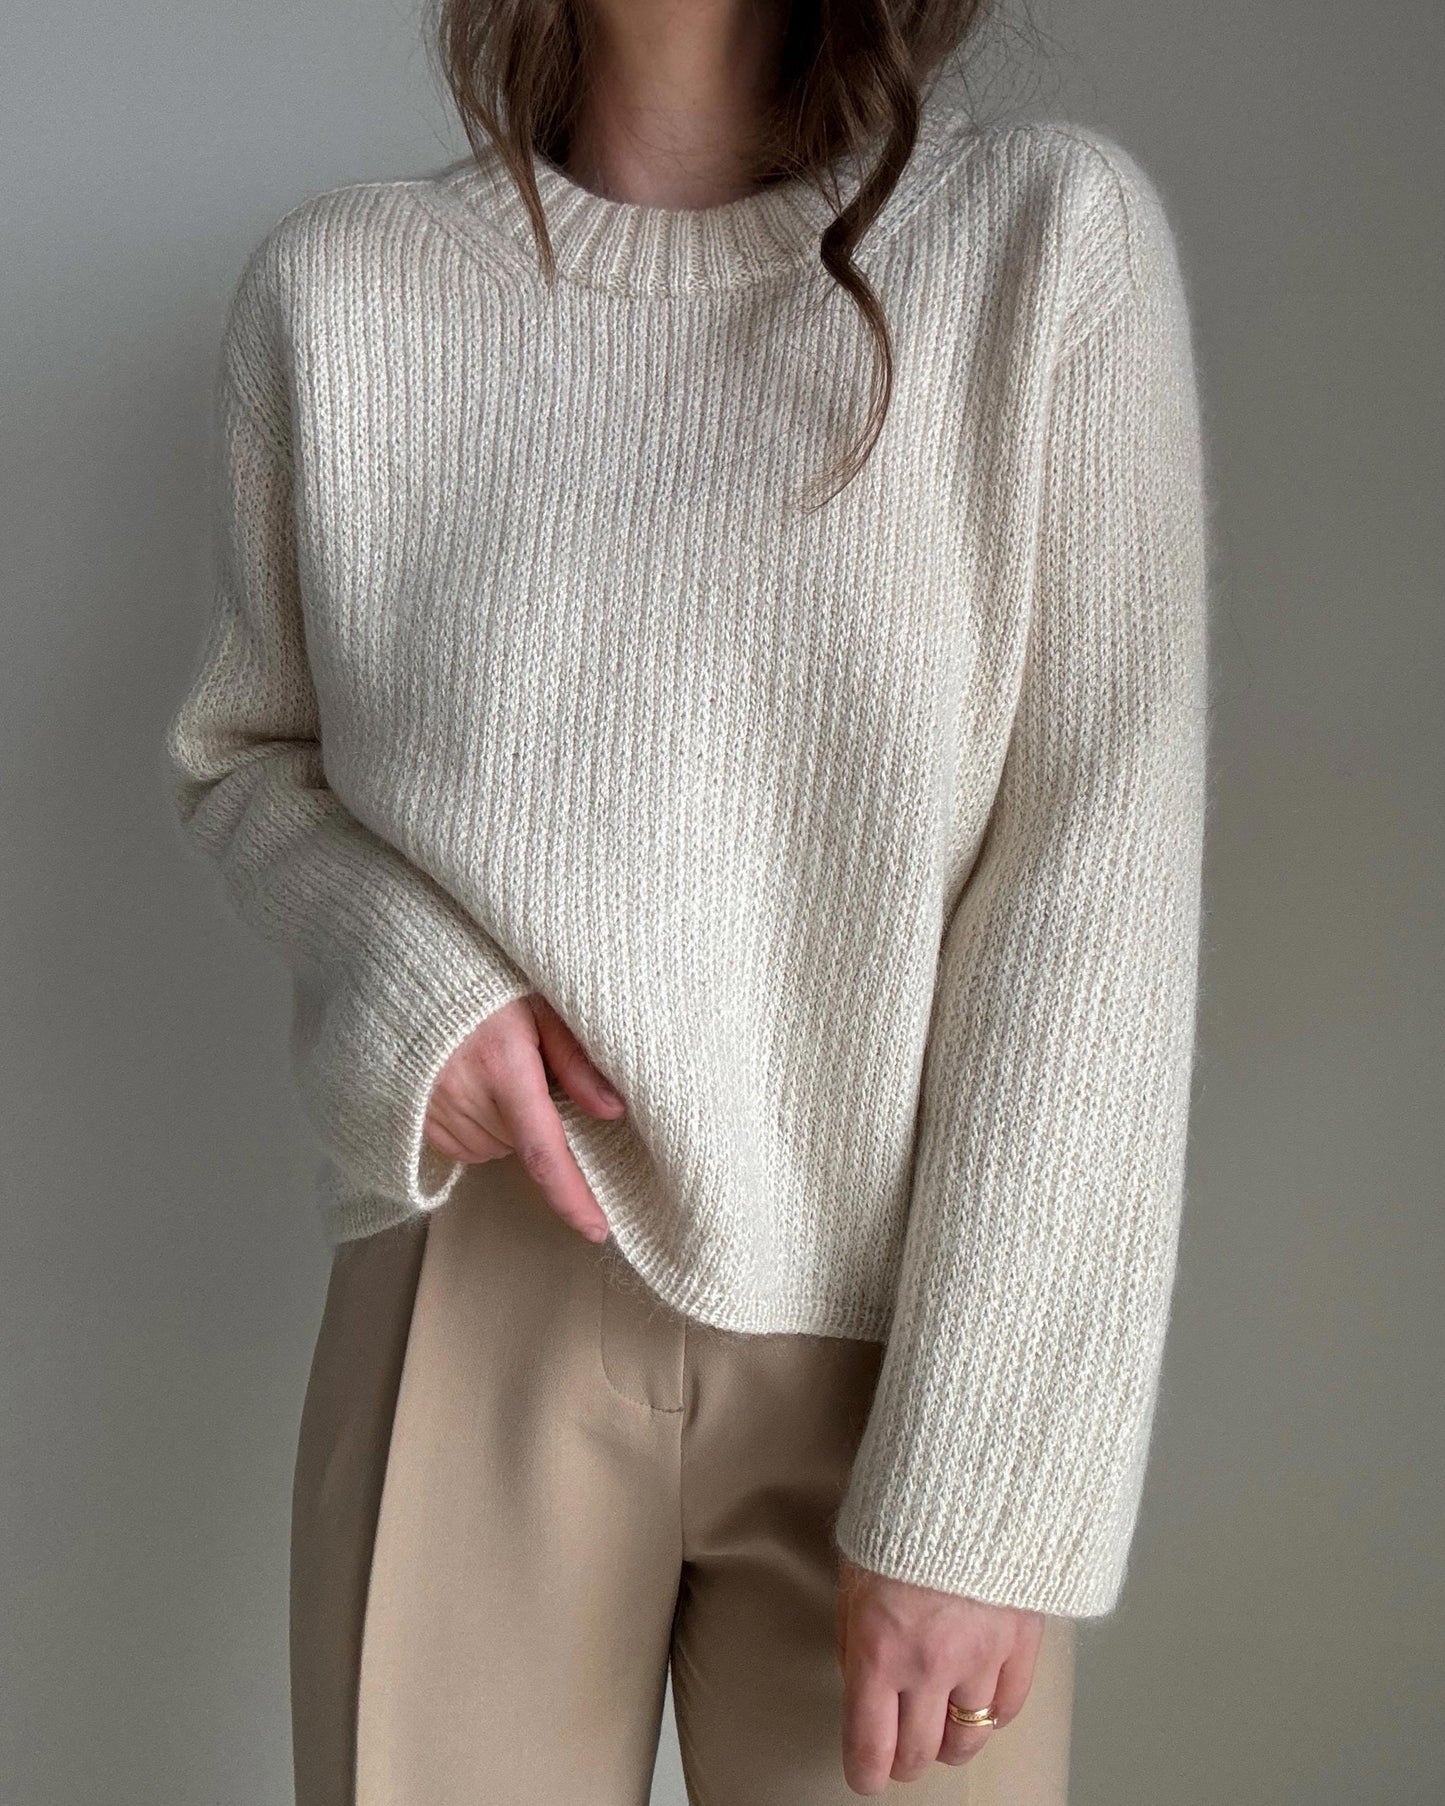 Chantal Sweater, an o-neck jumper pattern with a contemporary look and comfortable fit.